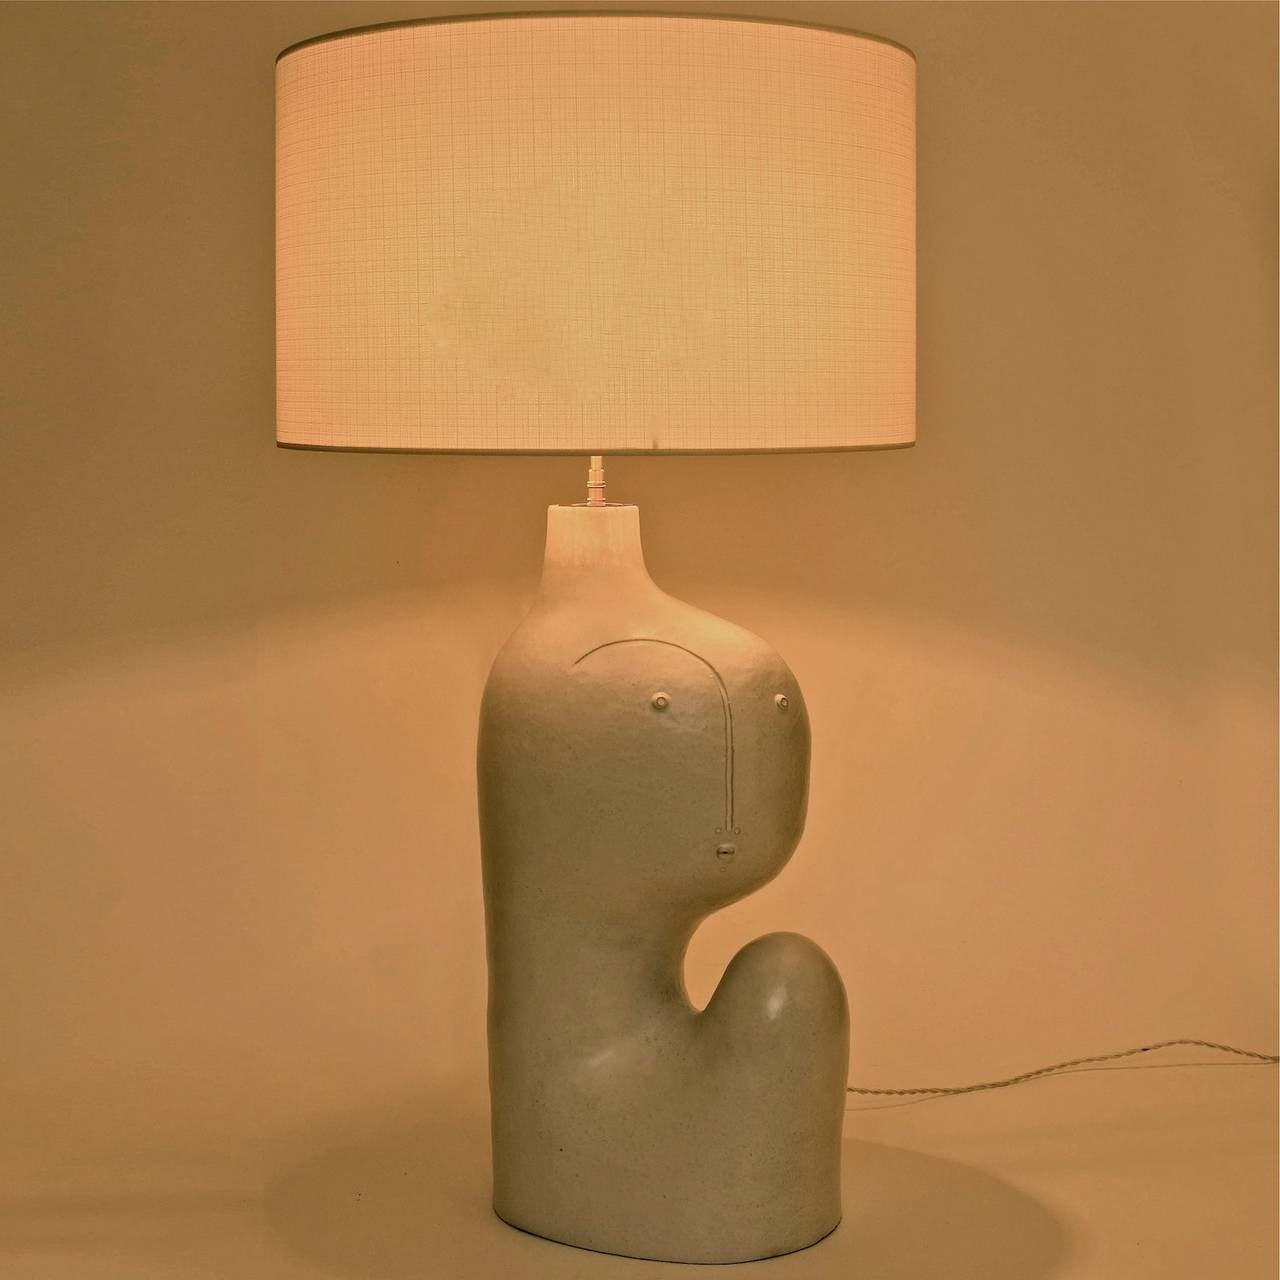 Contemporary Ceramic Lamp Base or Sculpture, Signed by DaLo